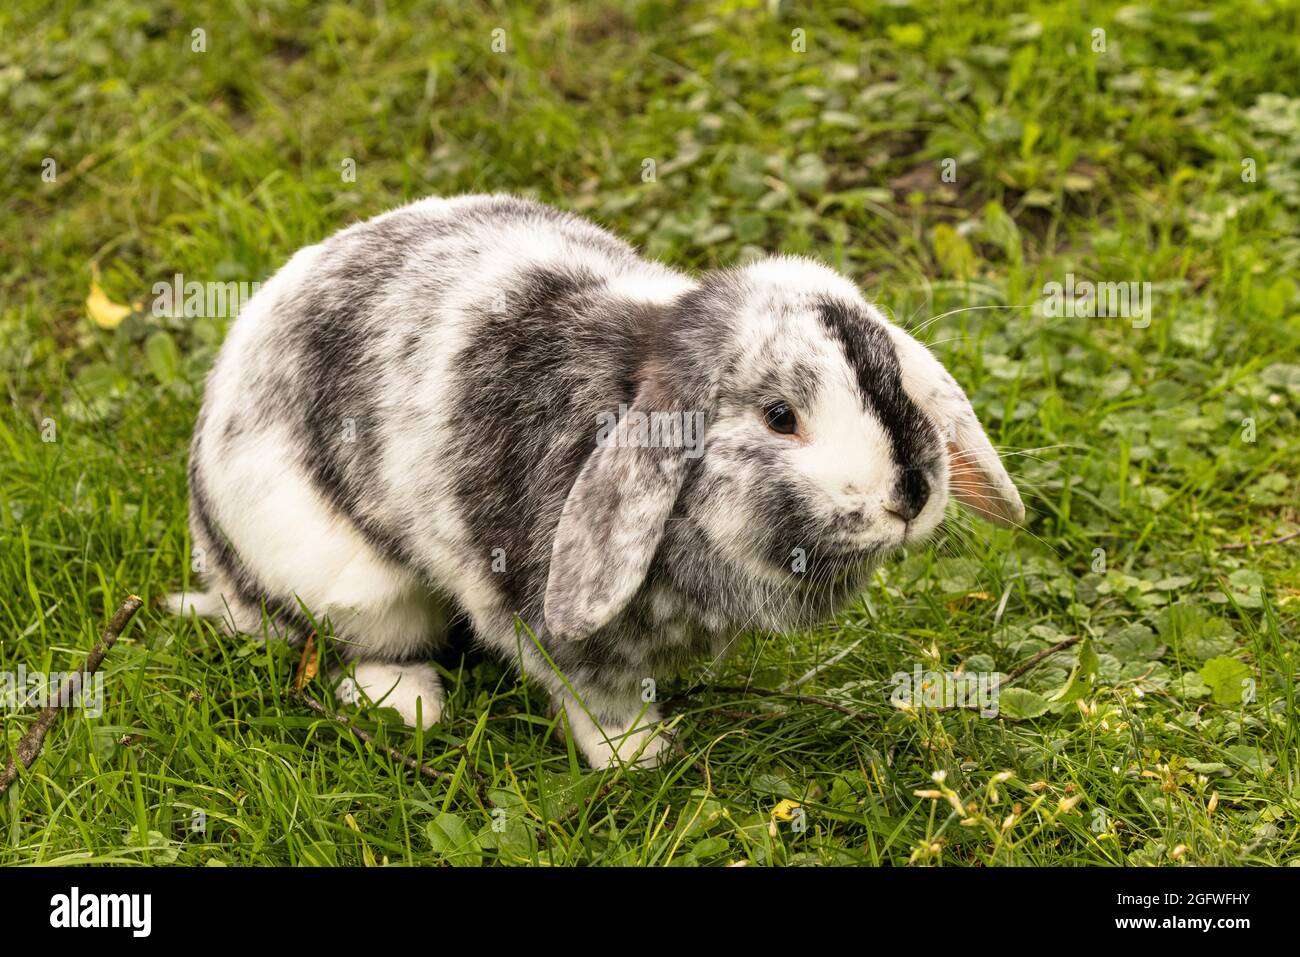 Lapin nain (Oryctolagus cuniculus F. domestica), lapin lop Banque D'Images